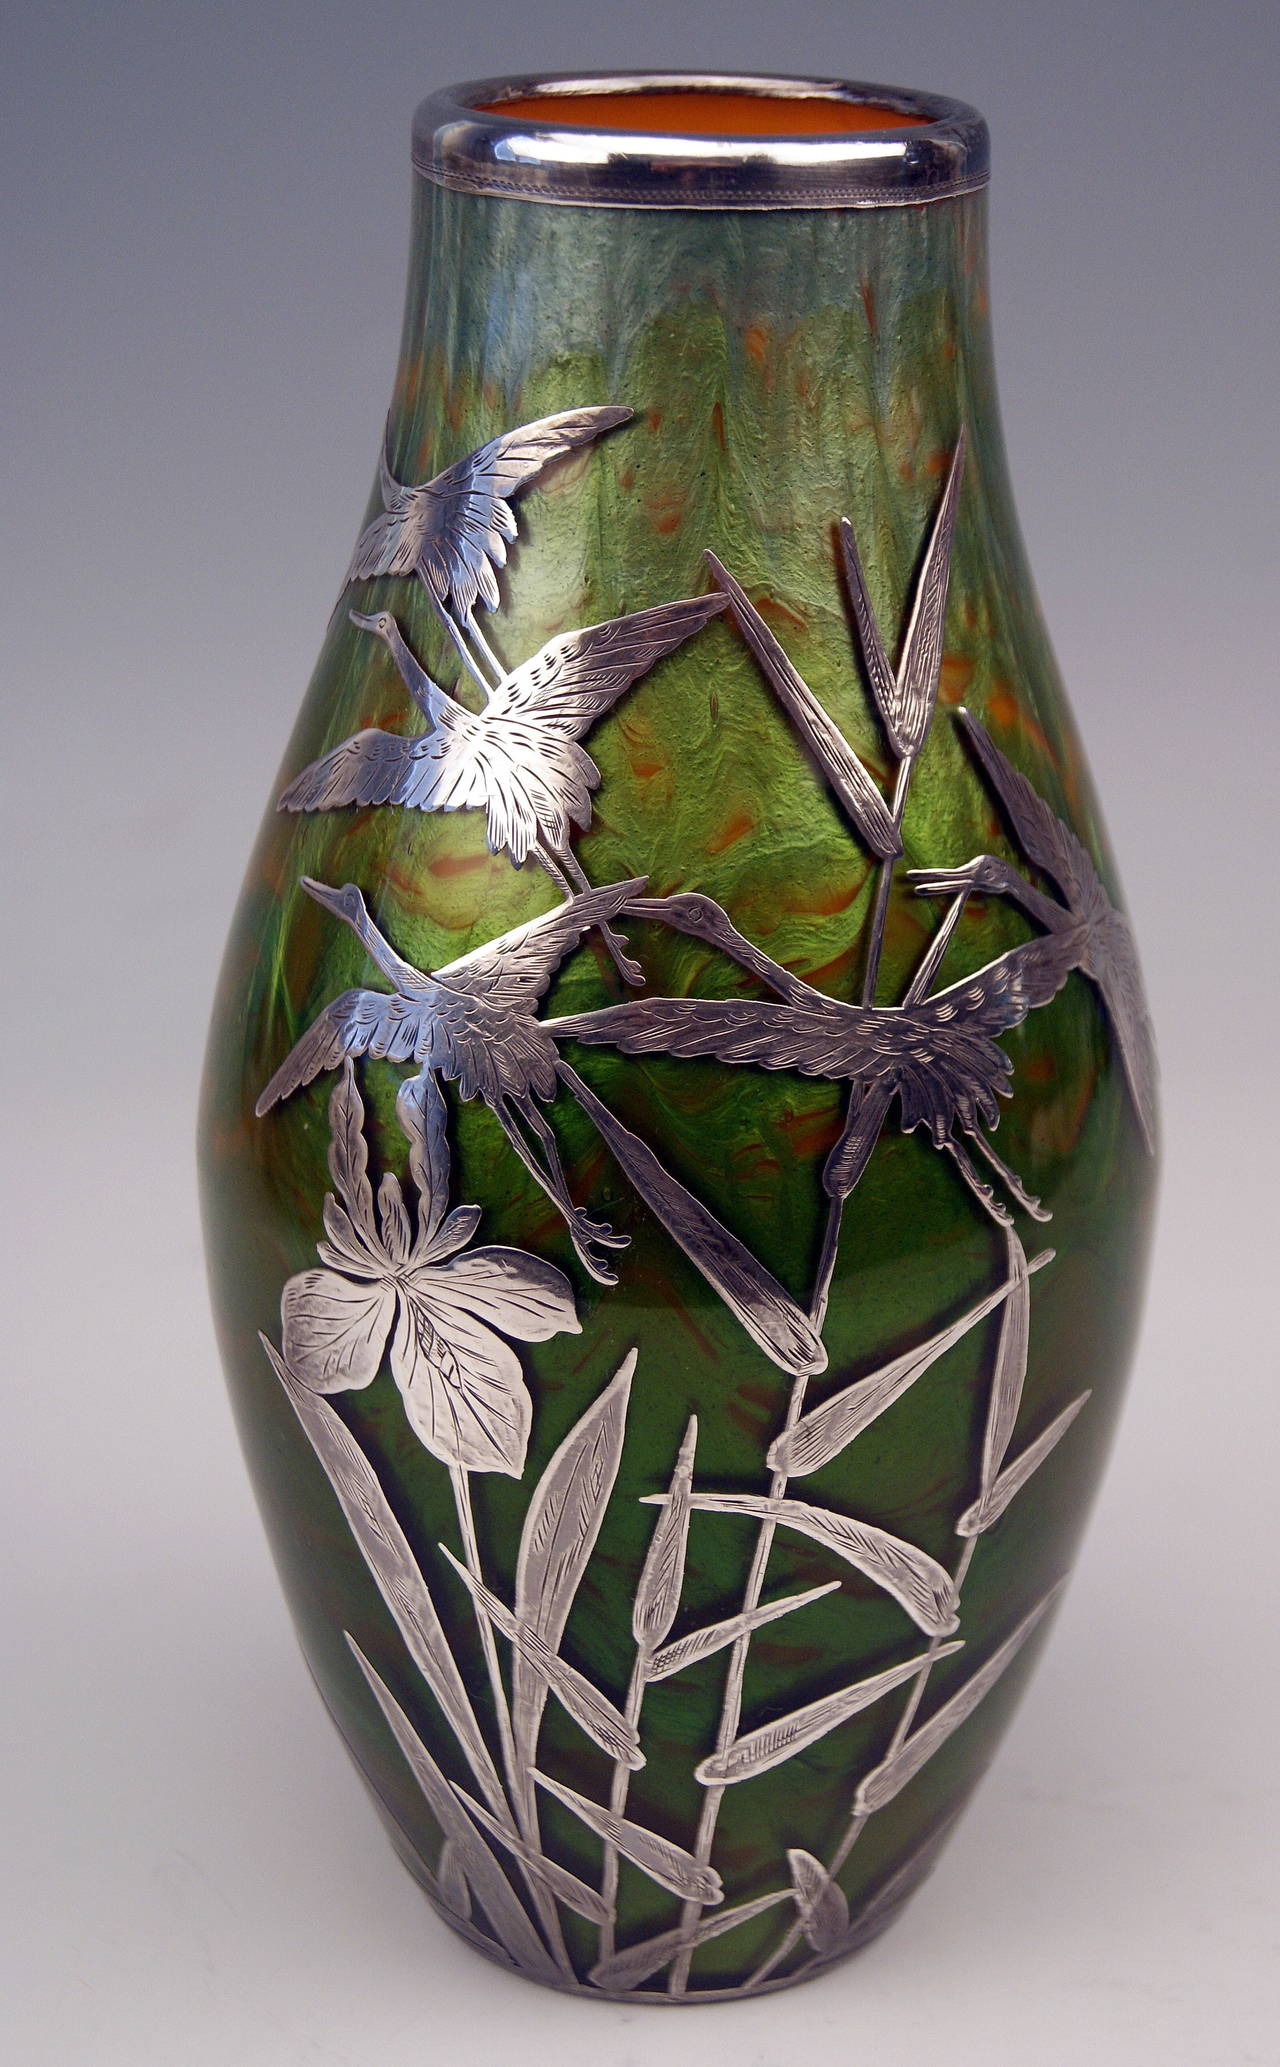 Early 20th Century Vase Loetz Widow Art Nouveau Titania Gre 2534 with Silver Overlay, circa 1906